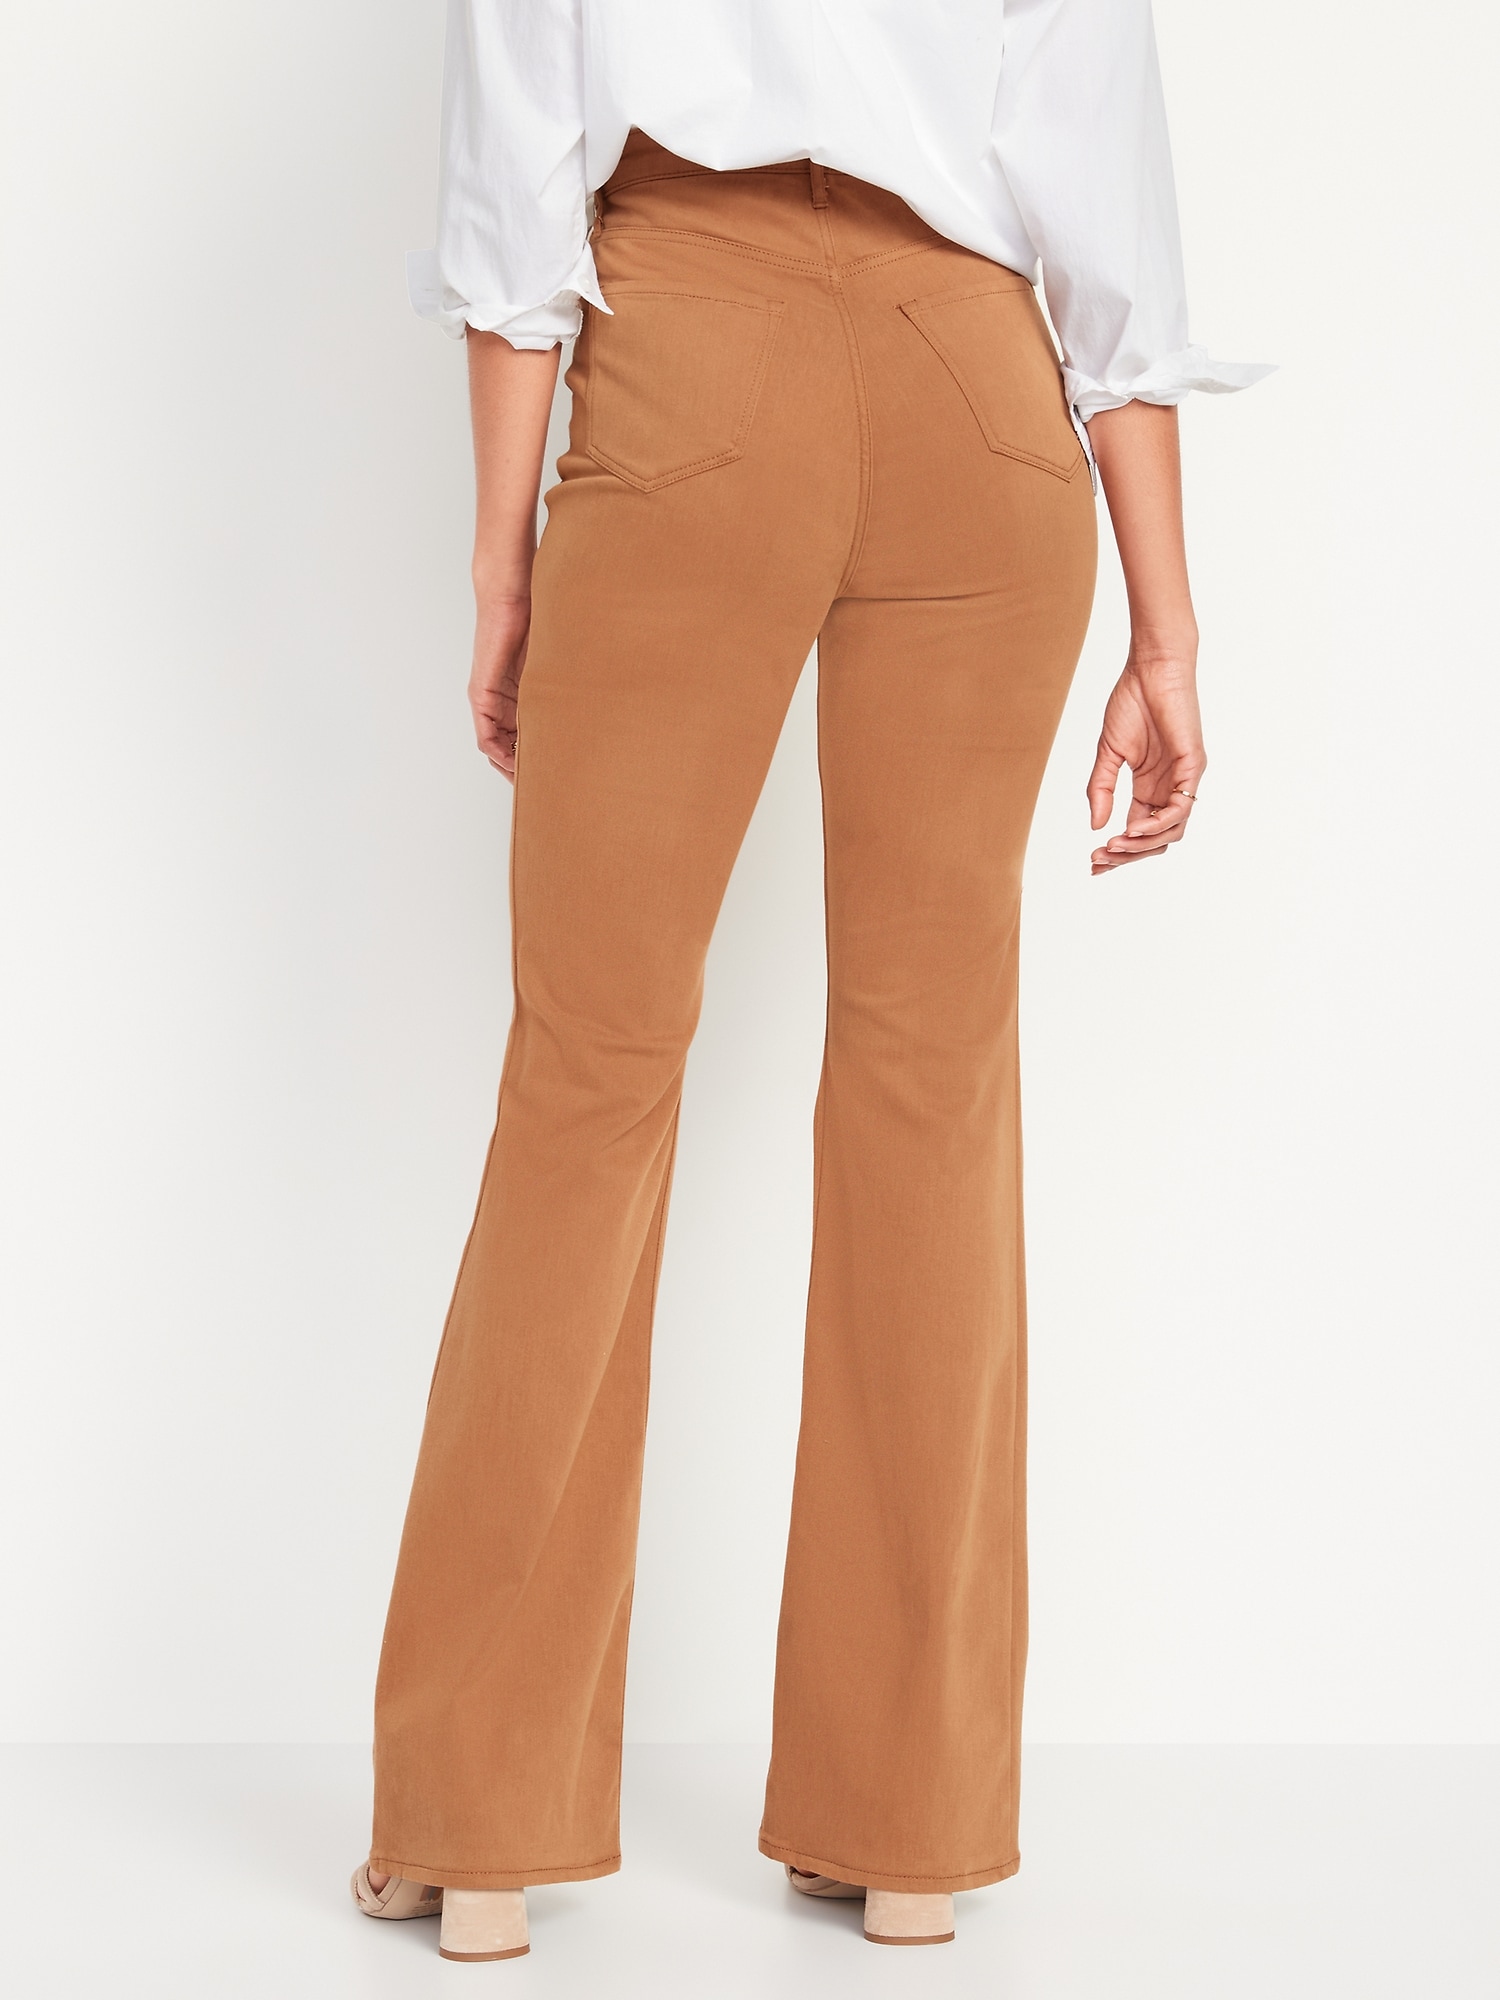 Higher High-Waisted Pop-Color Flare Jeans for Women